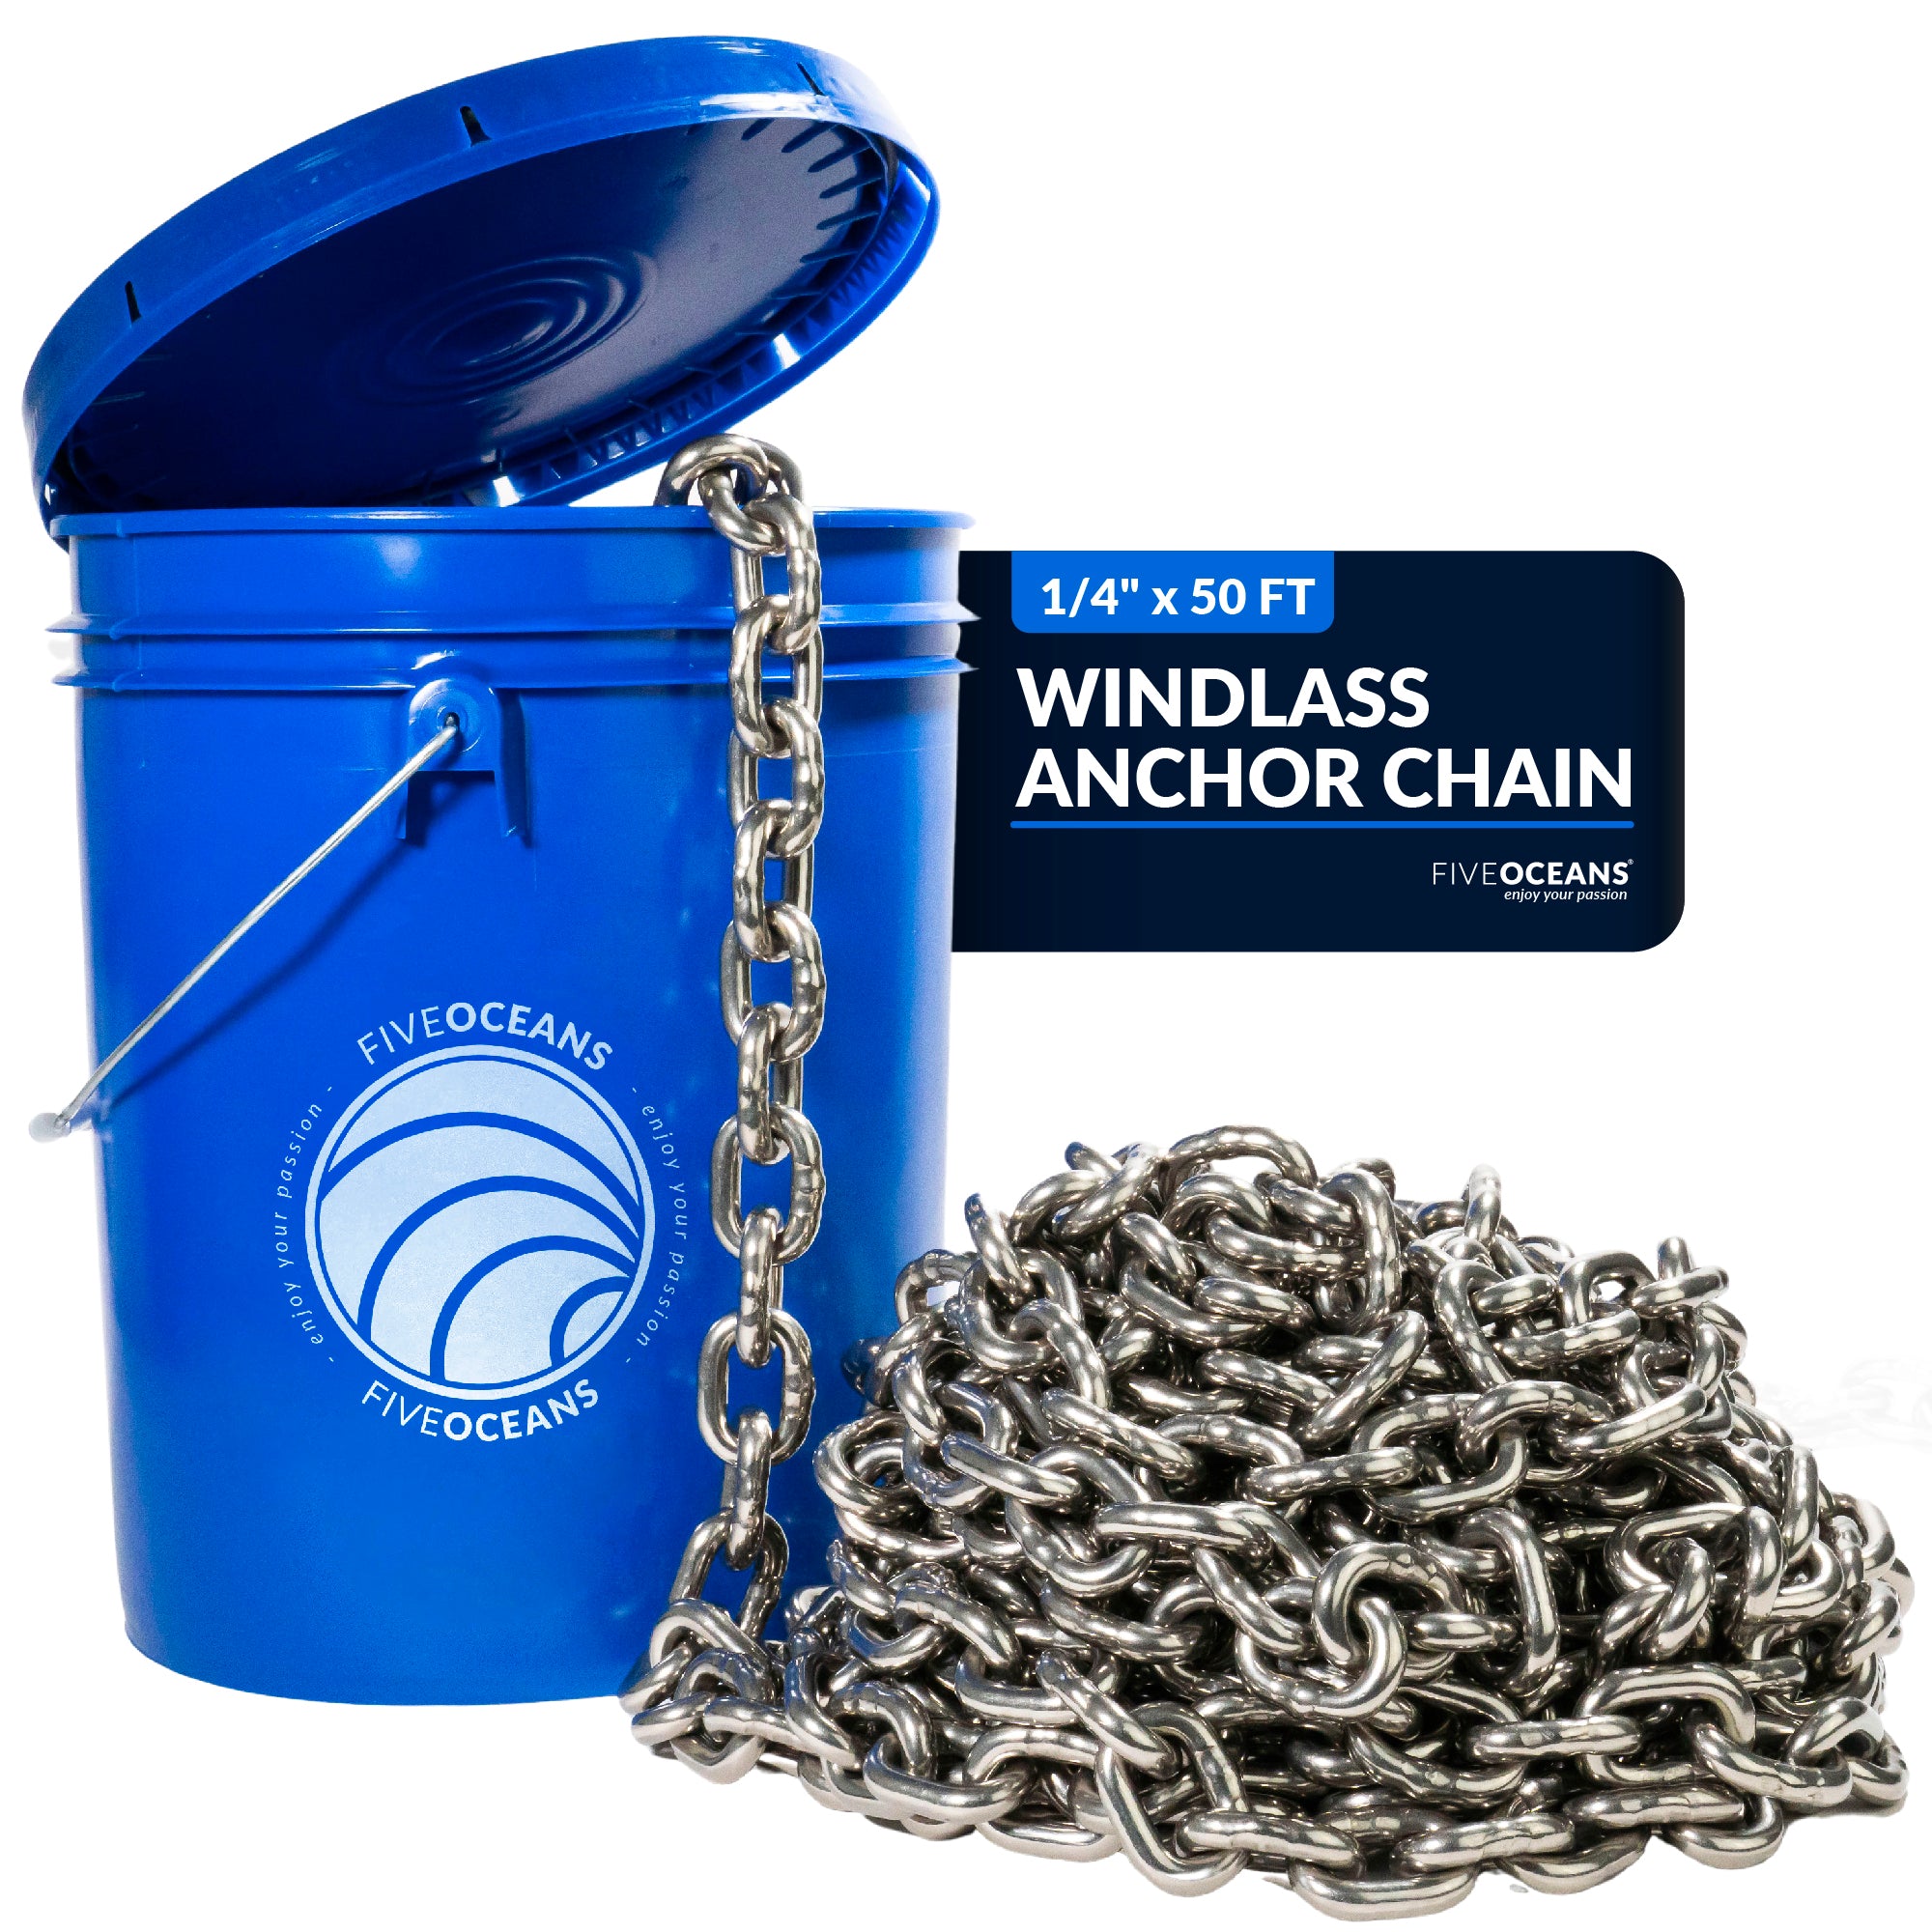 1/4" x 50' Boat Windlass Anchor Chain HT G4 Stainles Steel - FO4492-M50